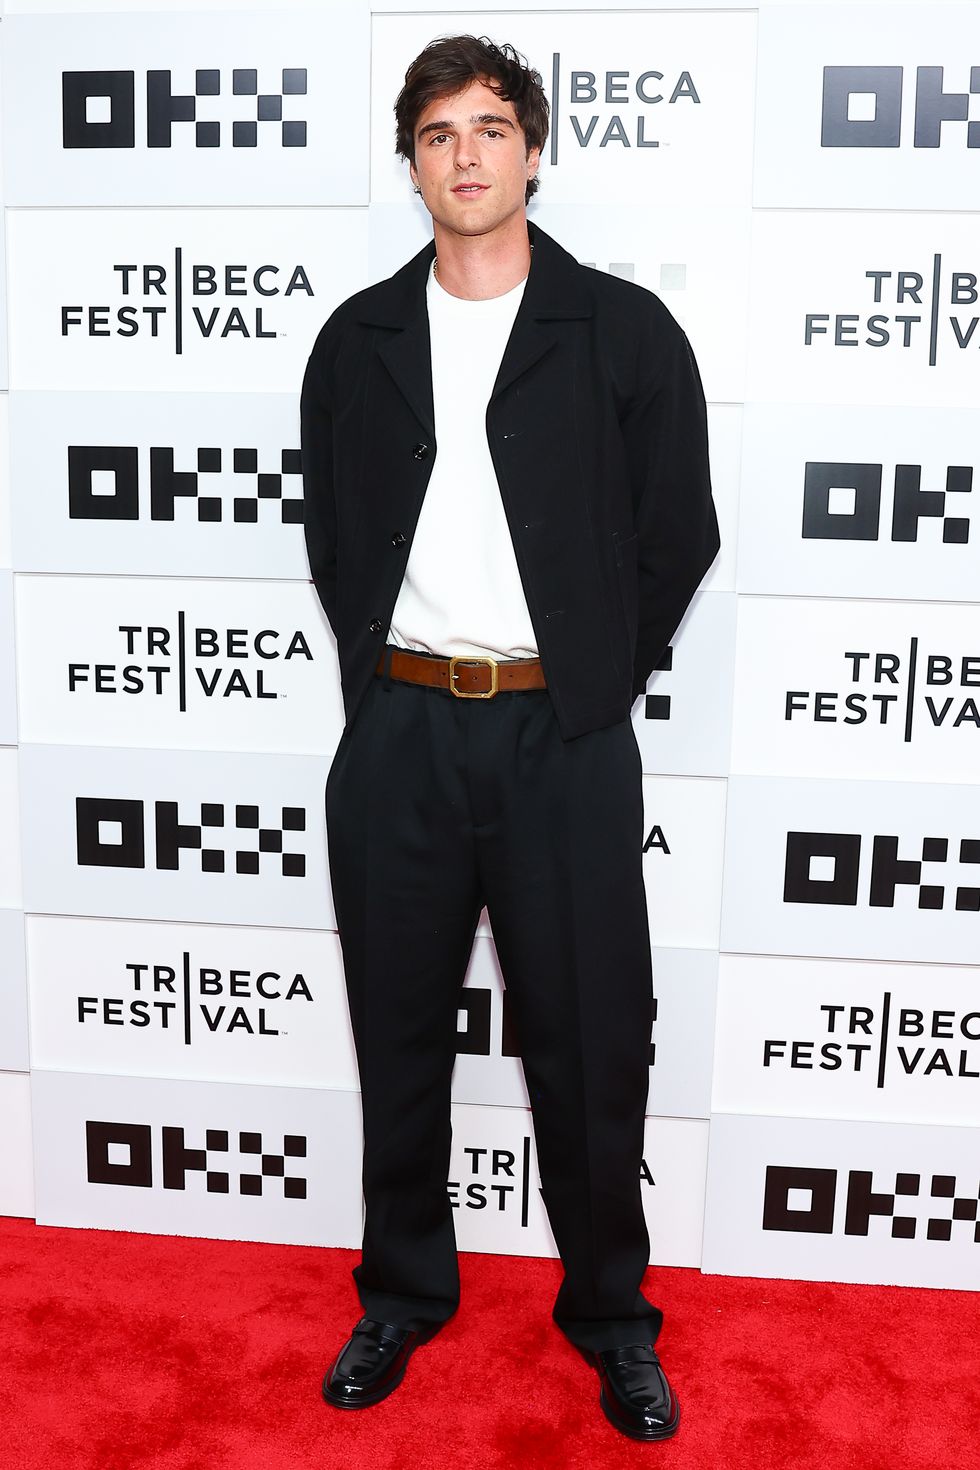 new york, new york june 09 actor jacob elordi attends the he went that way premiere at bmcc theater on june 09, 2023 in new york city photo by arturo holmesgetty images for tribeca festival